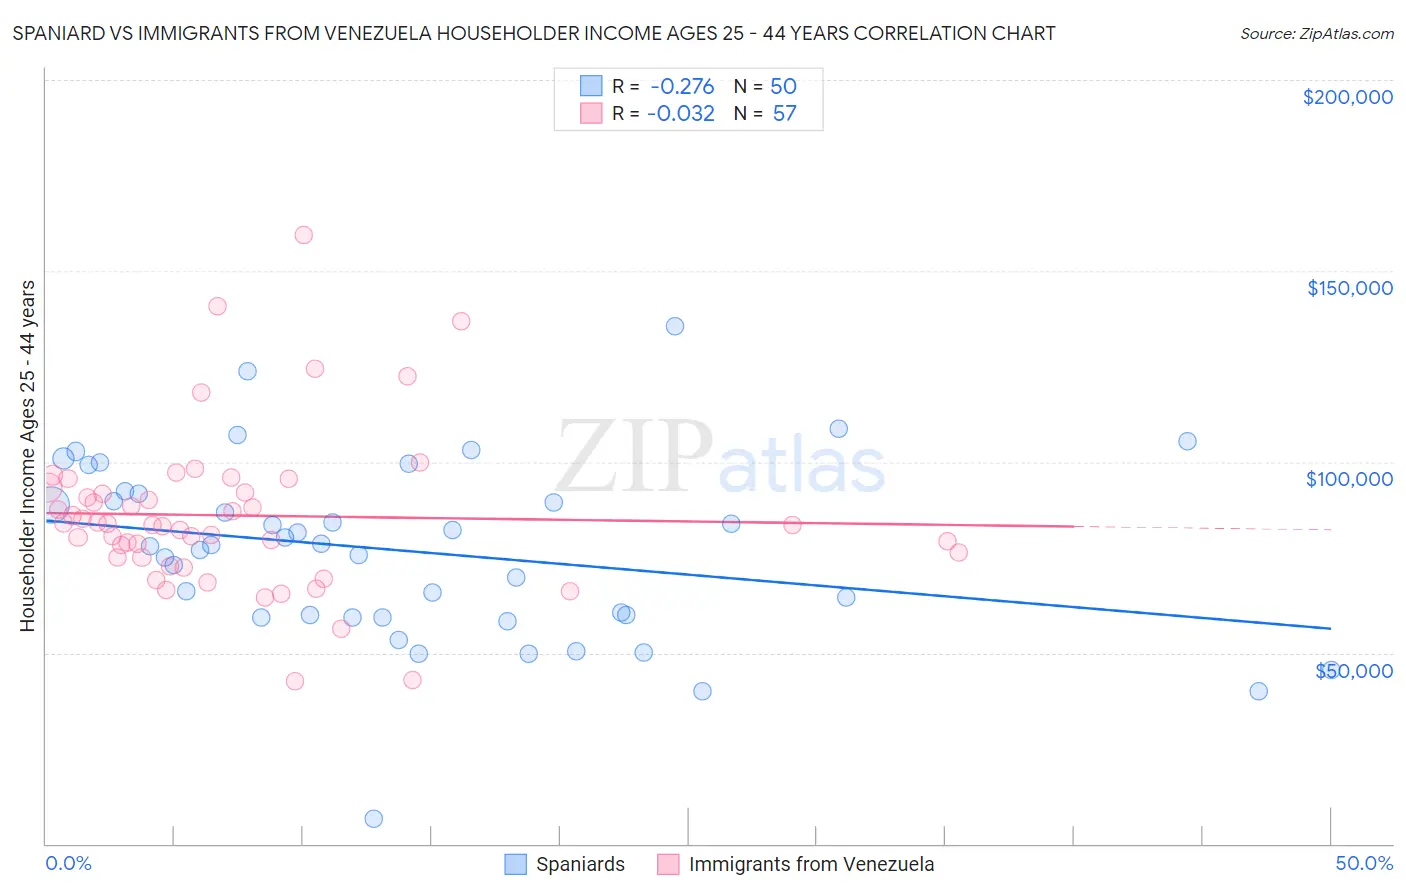 Spaniard vs Immigrants from Venezuela Householder Income Ages 25 - 44 years